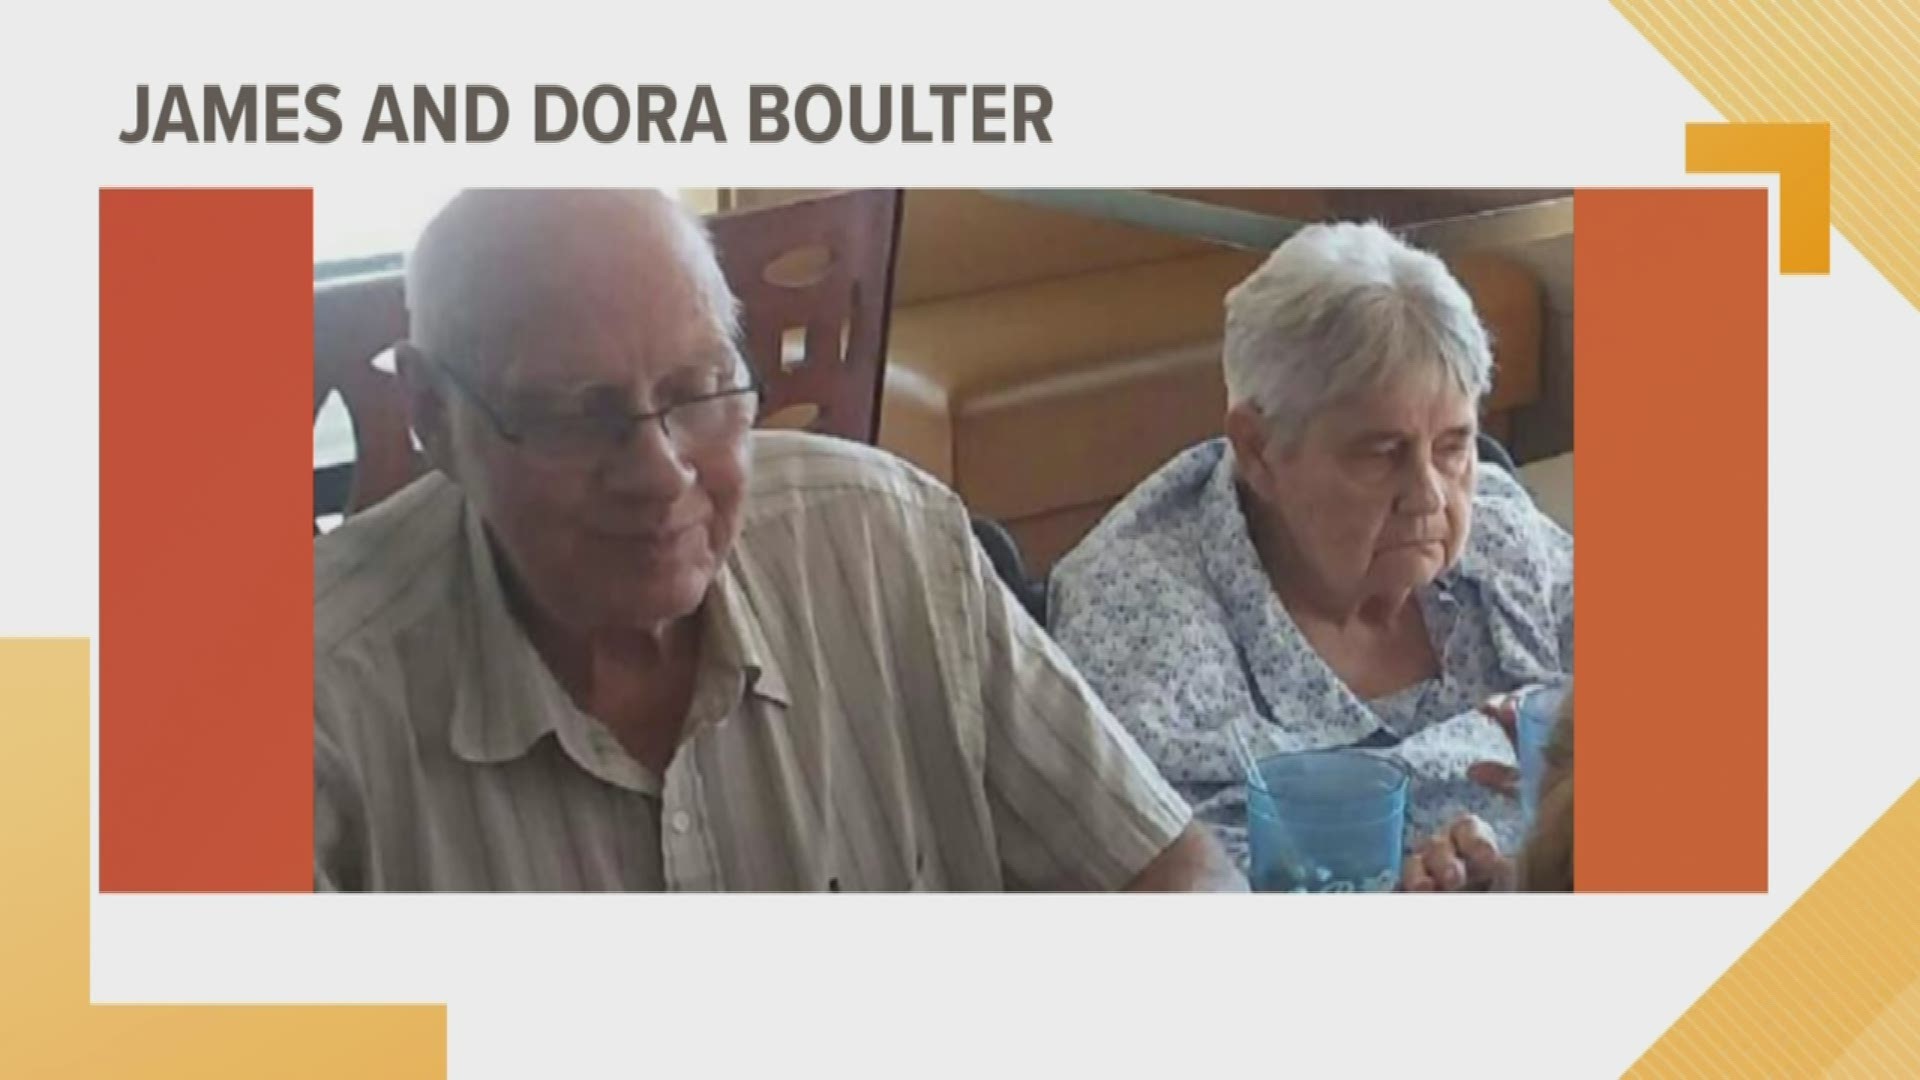 Authorities located James and Dora Boulter in Oceana County after they were reported missing on Christmas Eve.